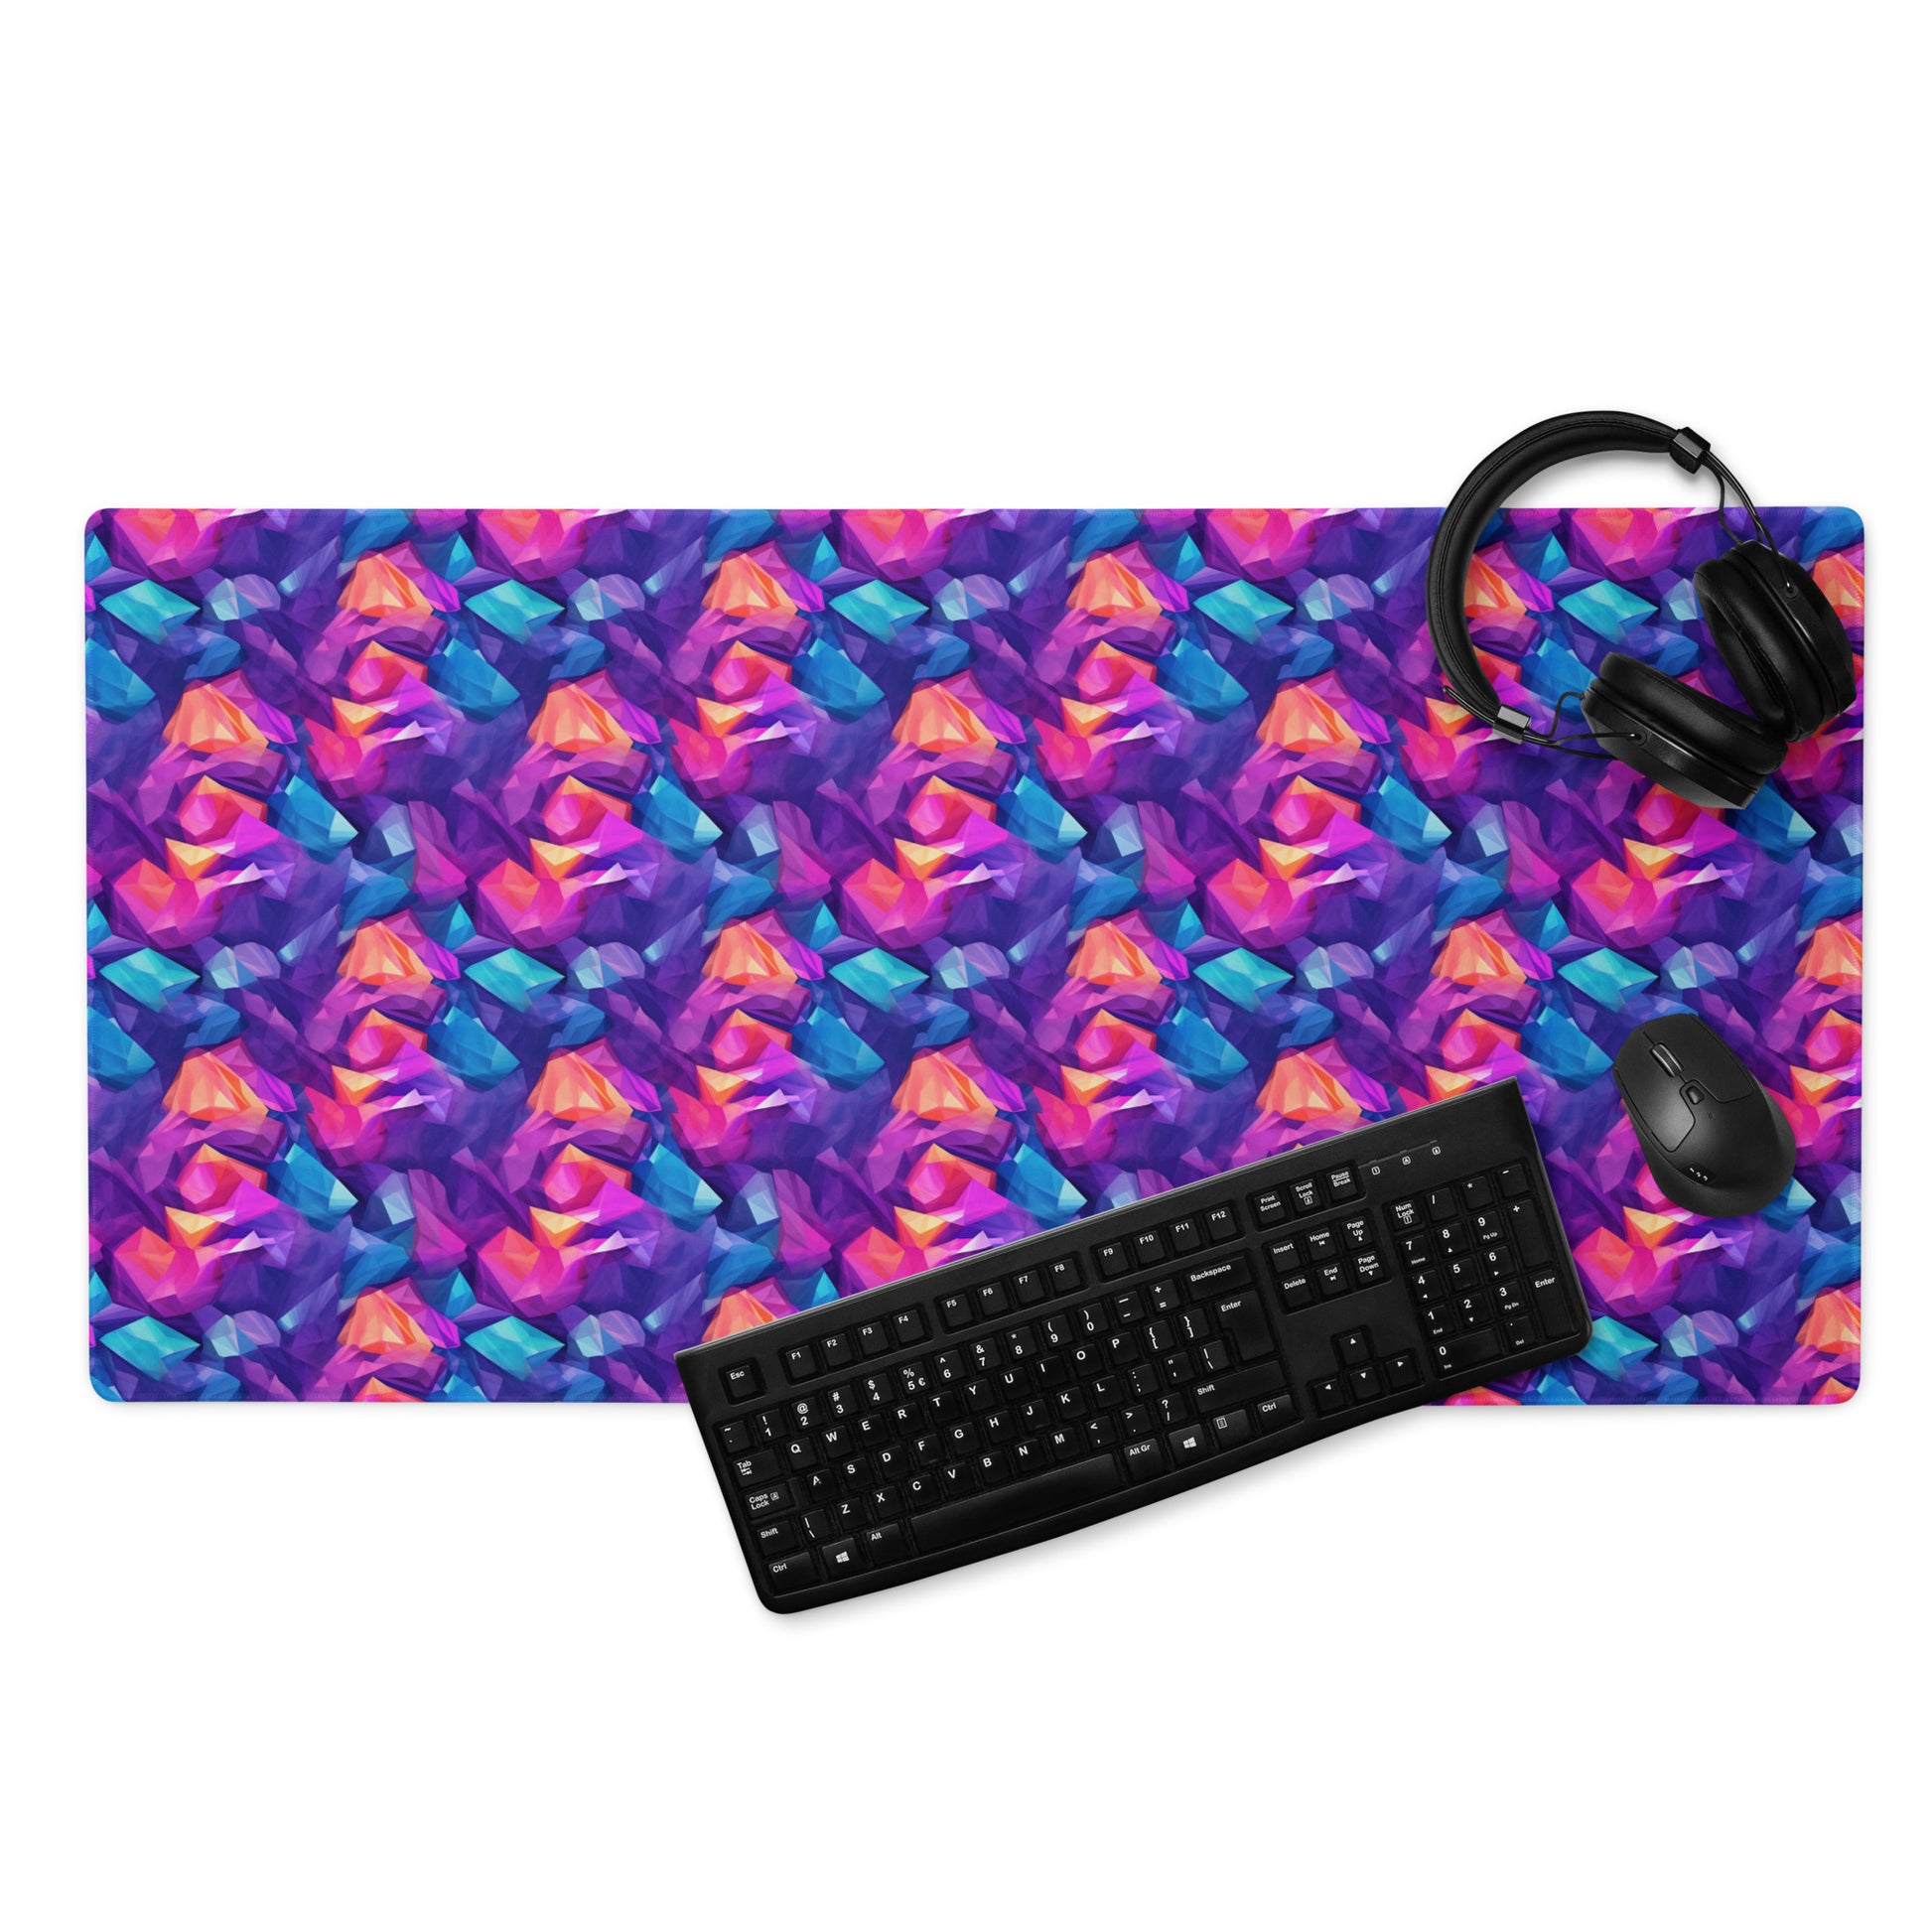 A 36" x 18" gaming desk pad with blue, purple, and orange crystals. A keyboard, mouse, and headphones sit on it.